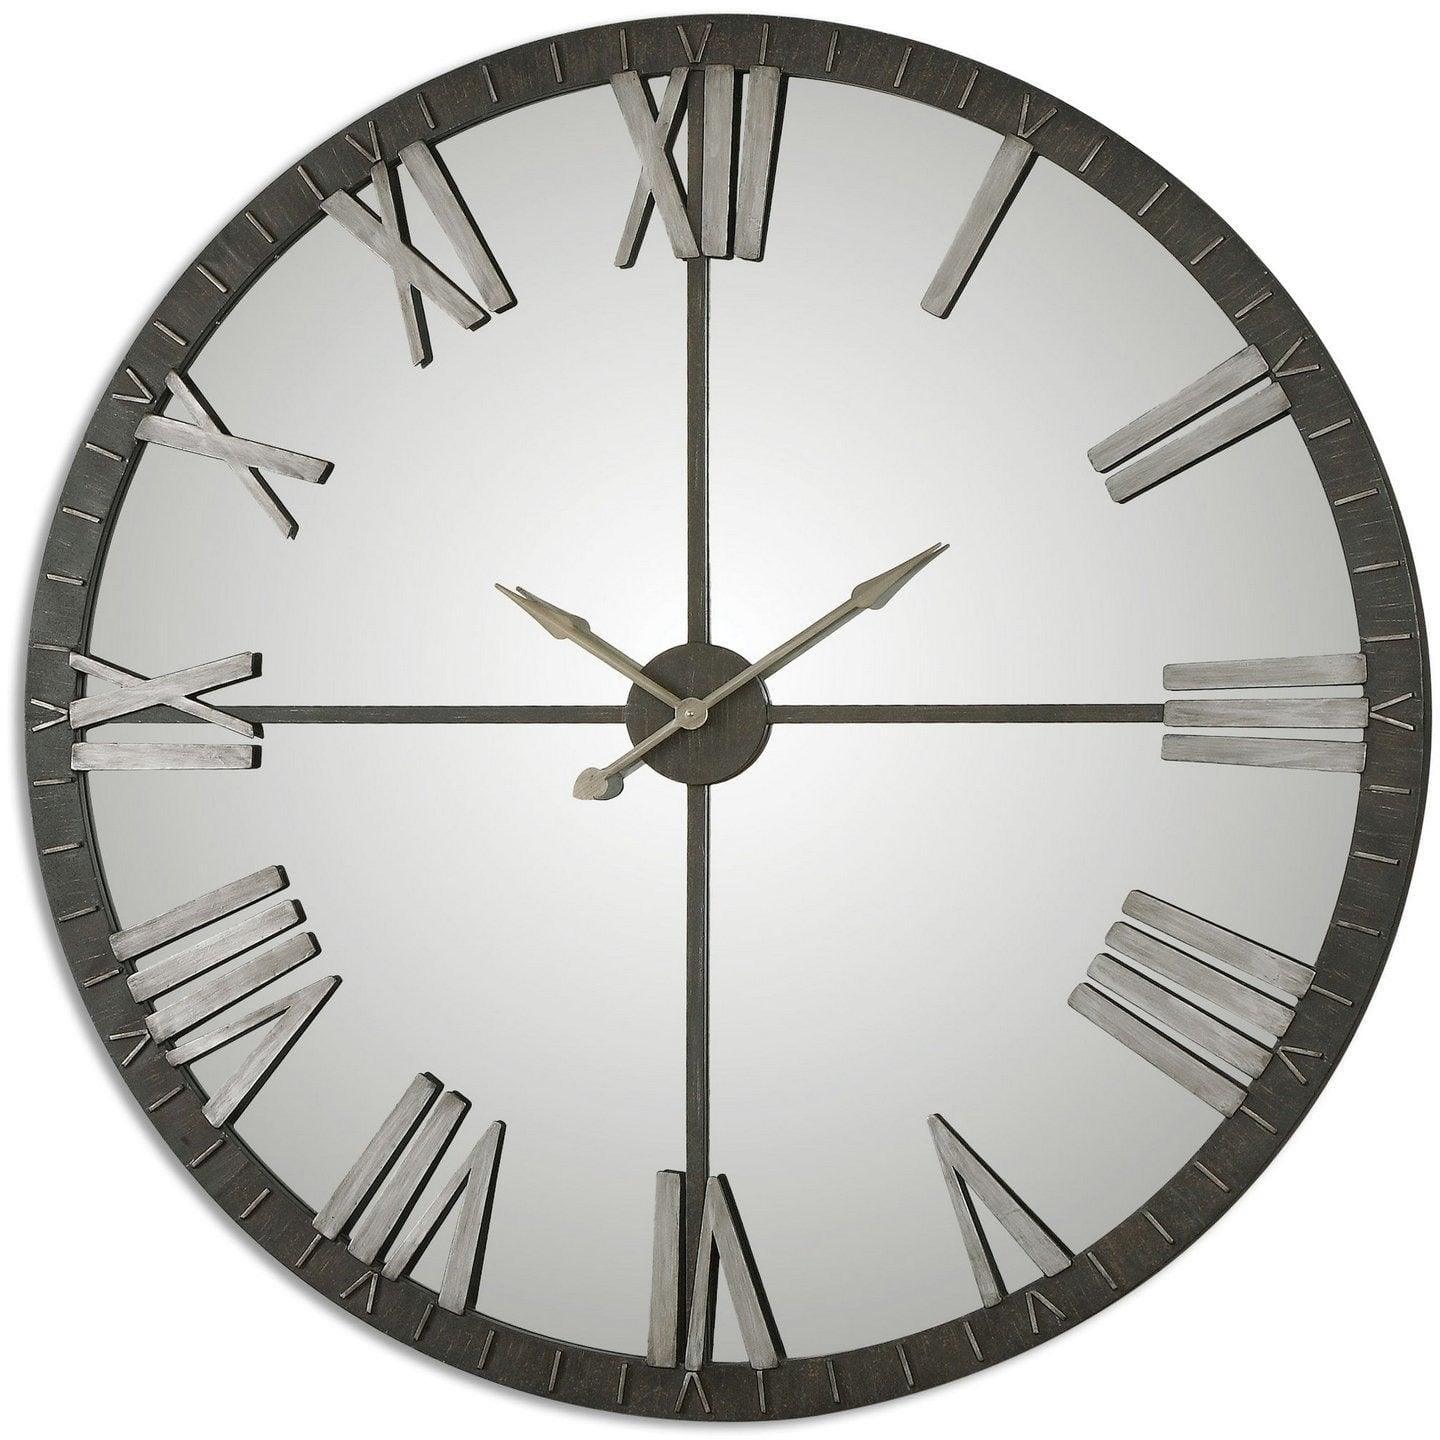 The Uttermost - Amelie Wall Clock - 06419 | Montreal Lighting & Hardware